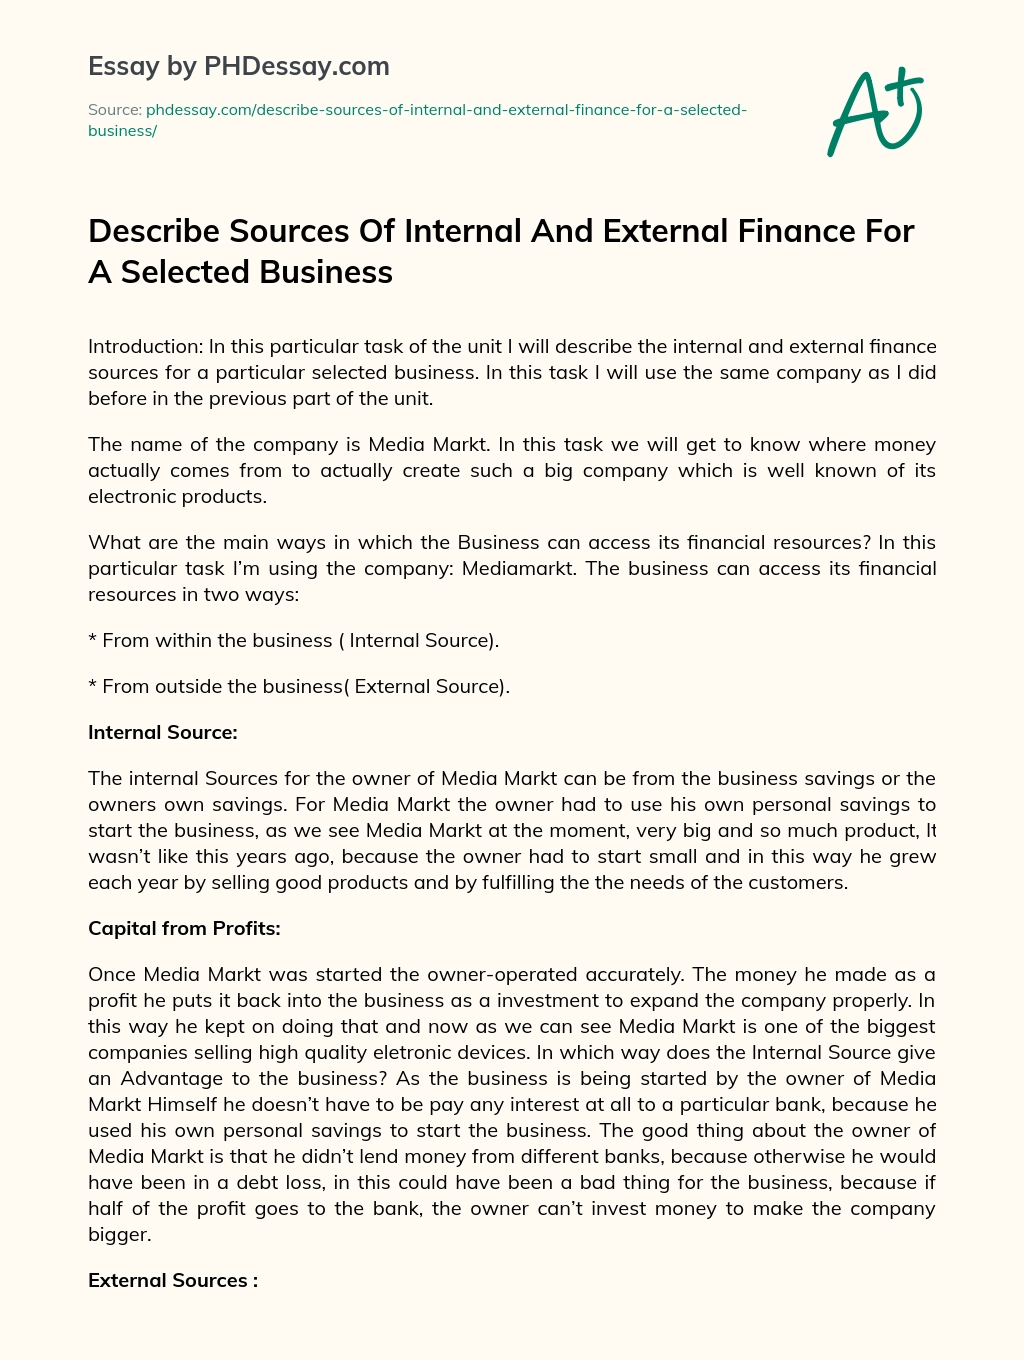 Describe Sources Of Internal And External Finance For A Selected Business essay